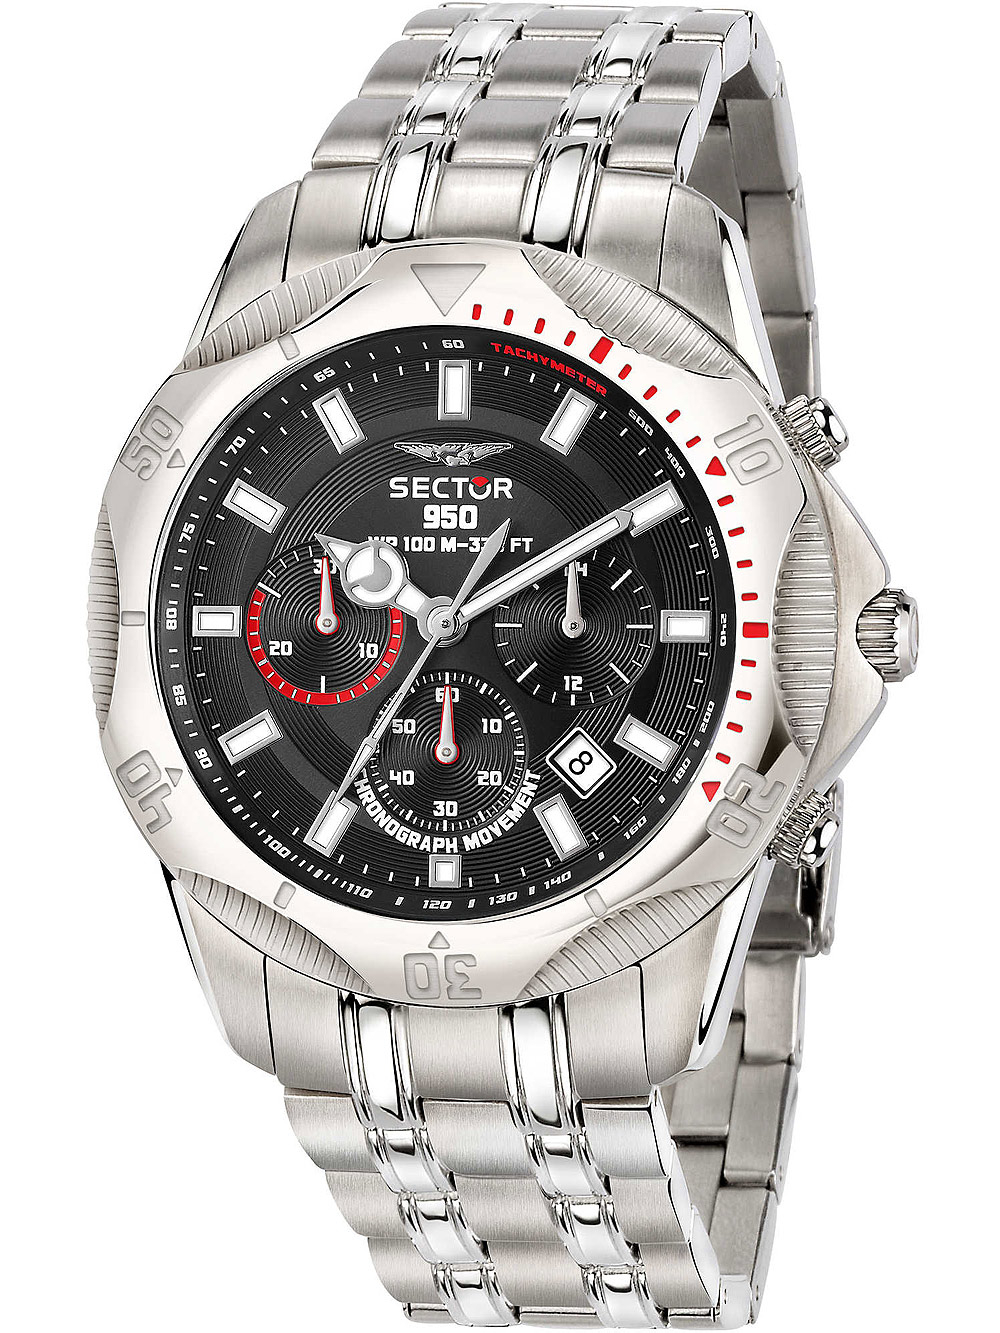 Sector R3273981007 Serie 950 Chronograph 44mm 10ATM